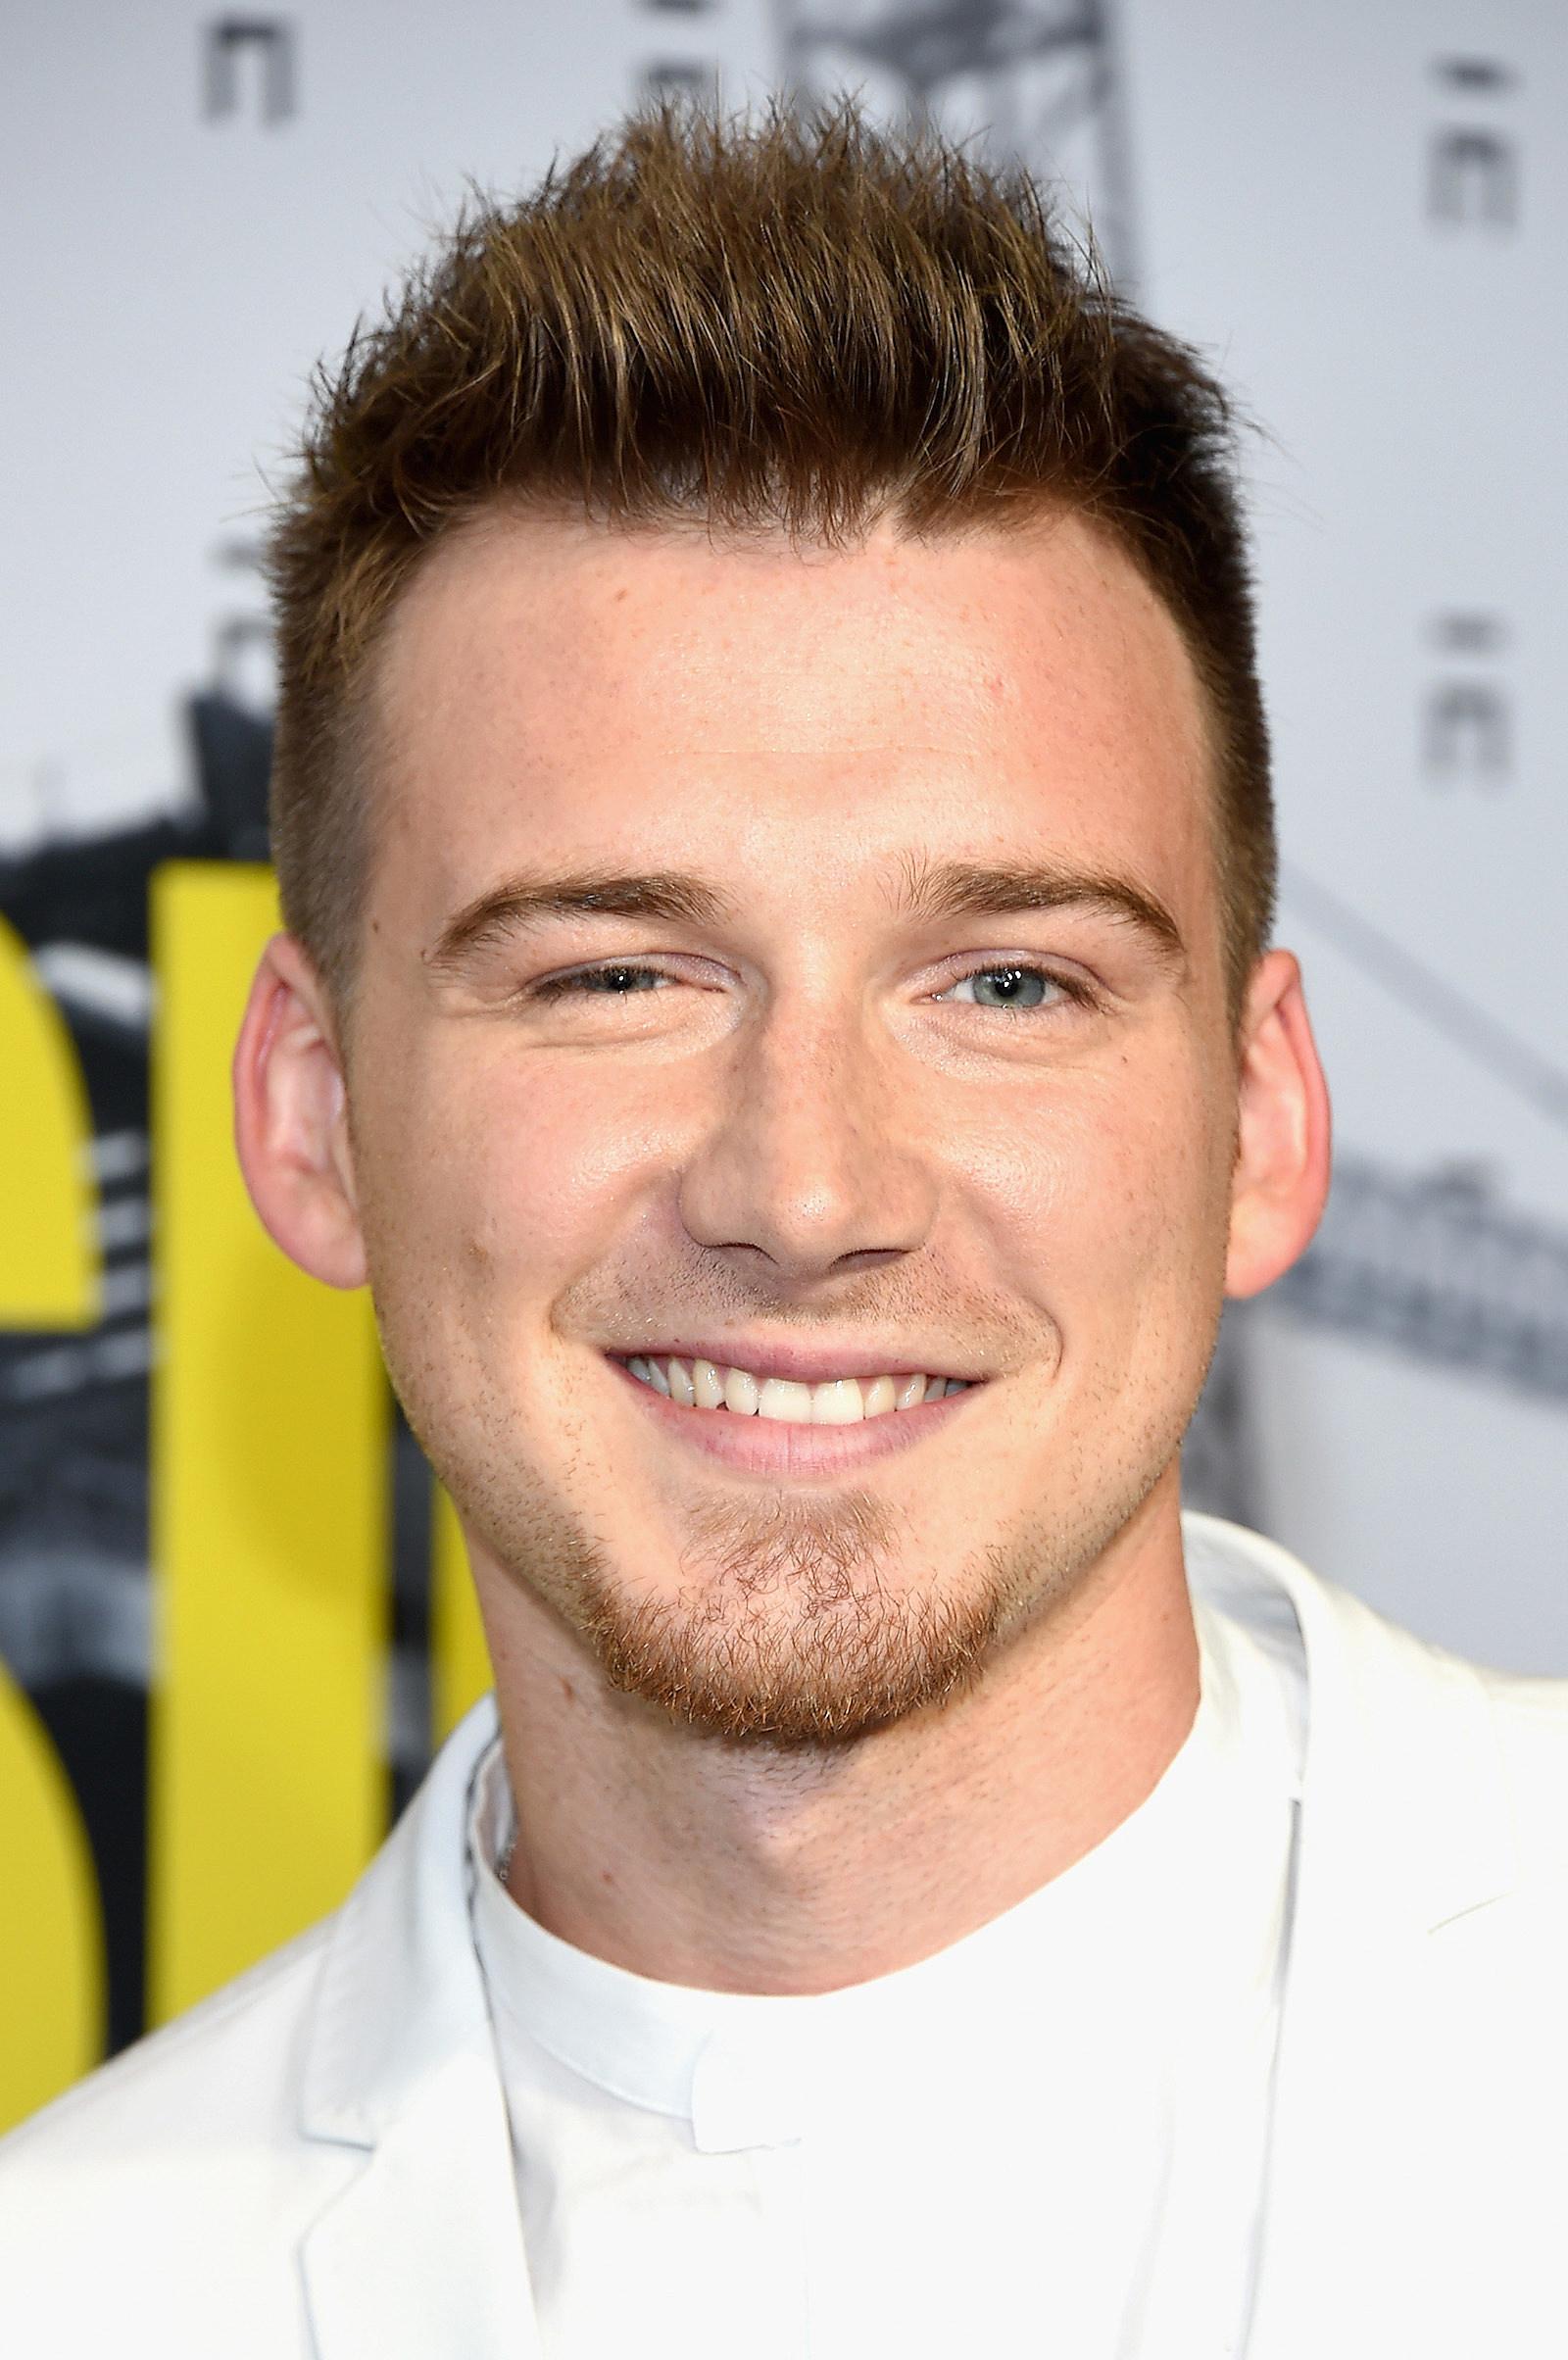 Watch Morgan Wallen's Stripped Down Version Of 'Whiskey Glasses'